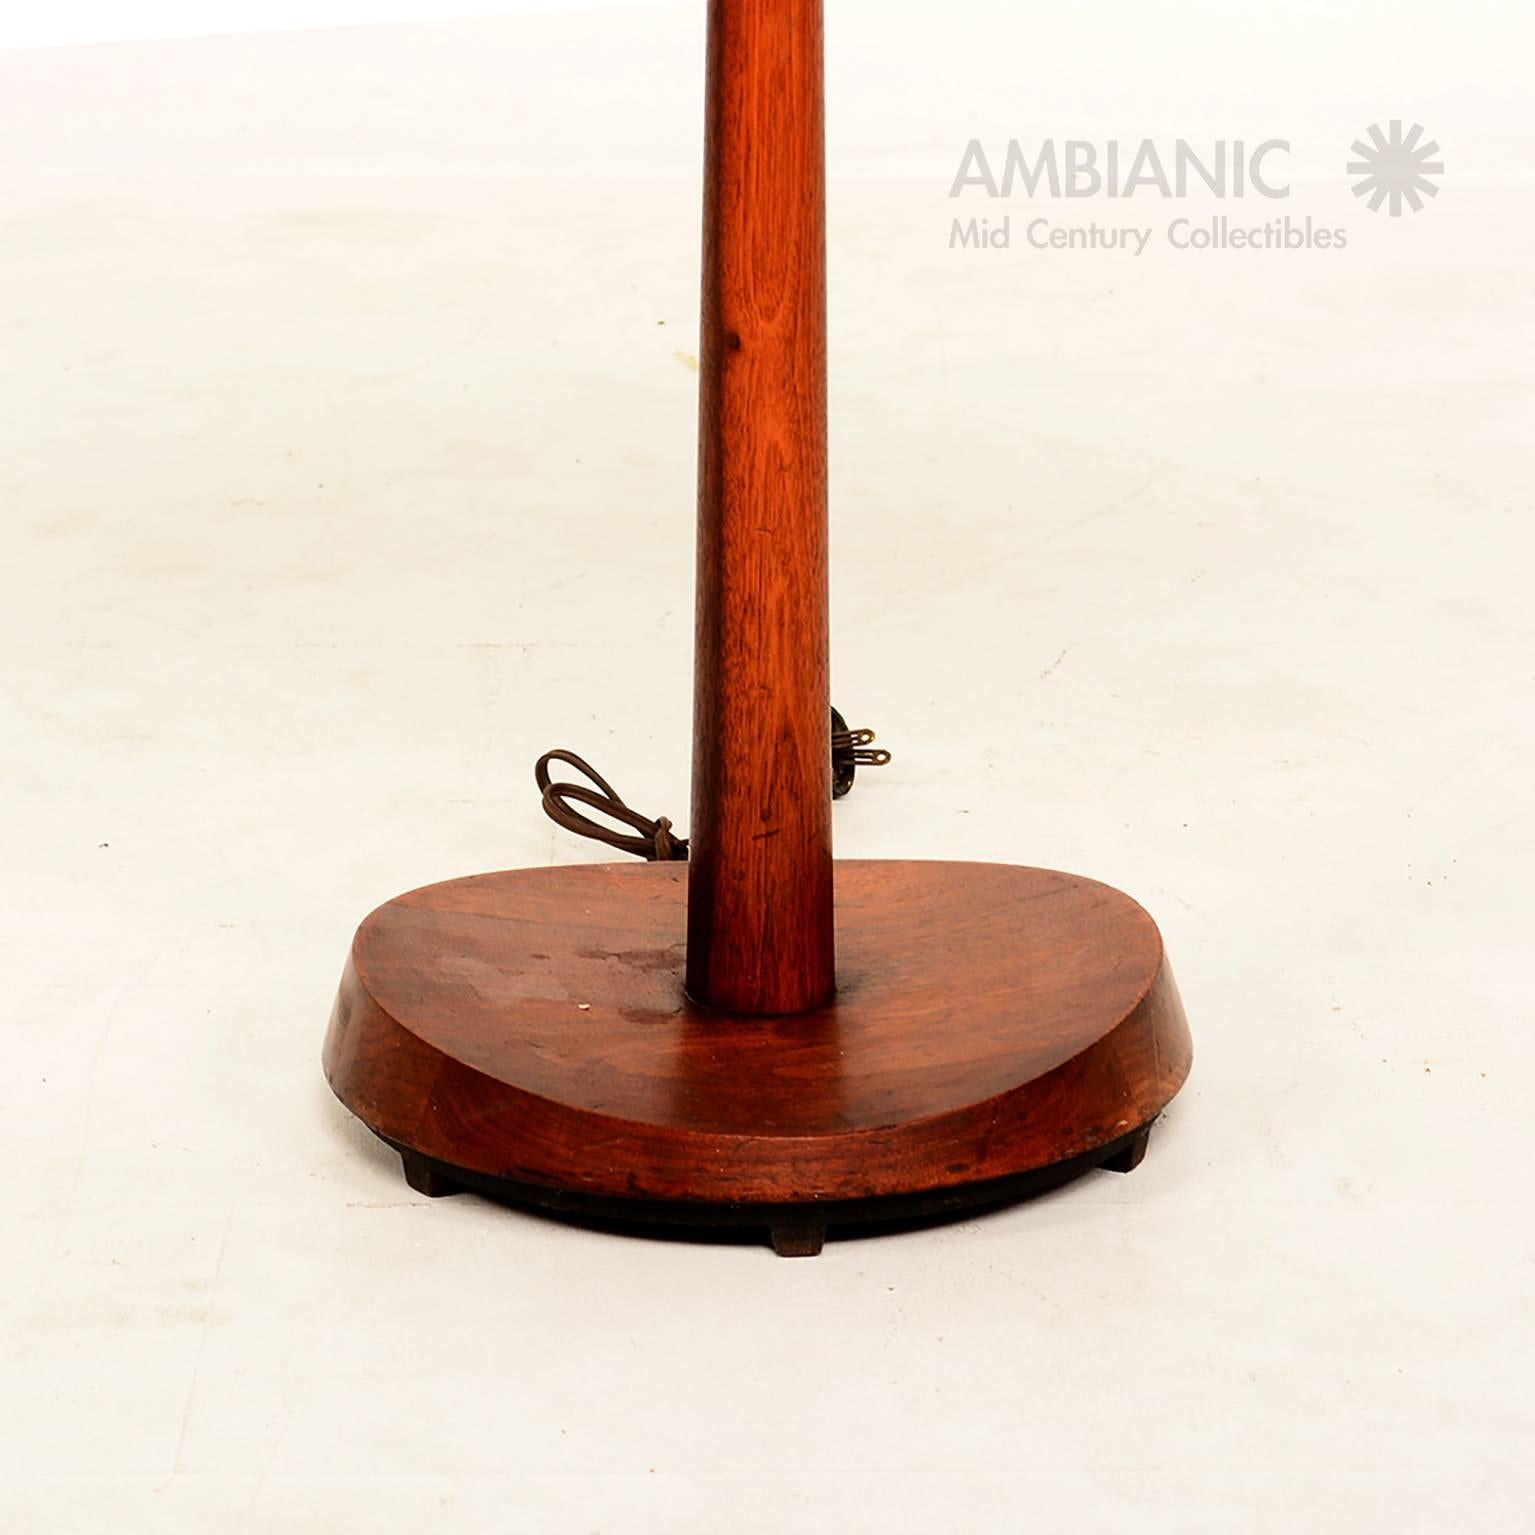 Mid-20th Century Mid-Century Modern Sculptural Walnut Floor Lamp with Built in Table